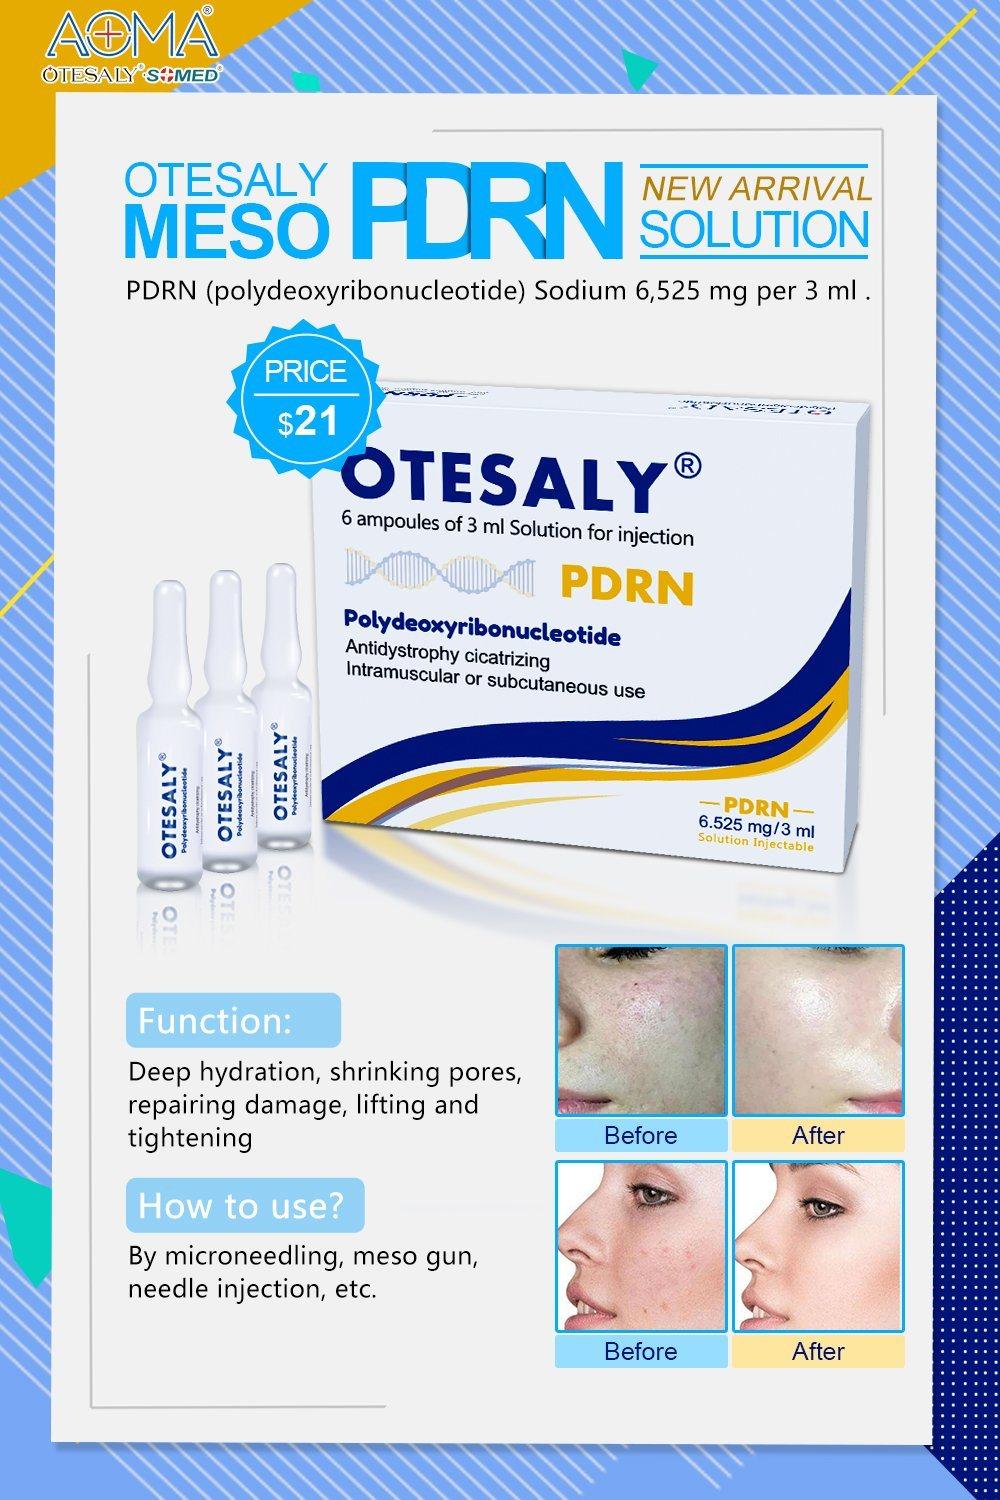 Hot Selling Skin Care Product Anti Aging Otesaly 8 Percent Ha Skin Rejuvenating Microneedling Solution